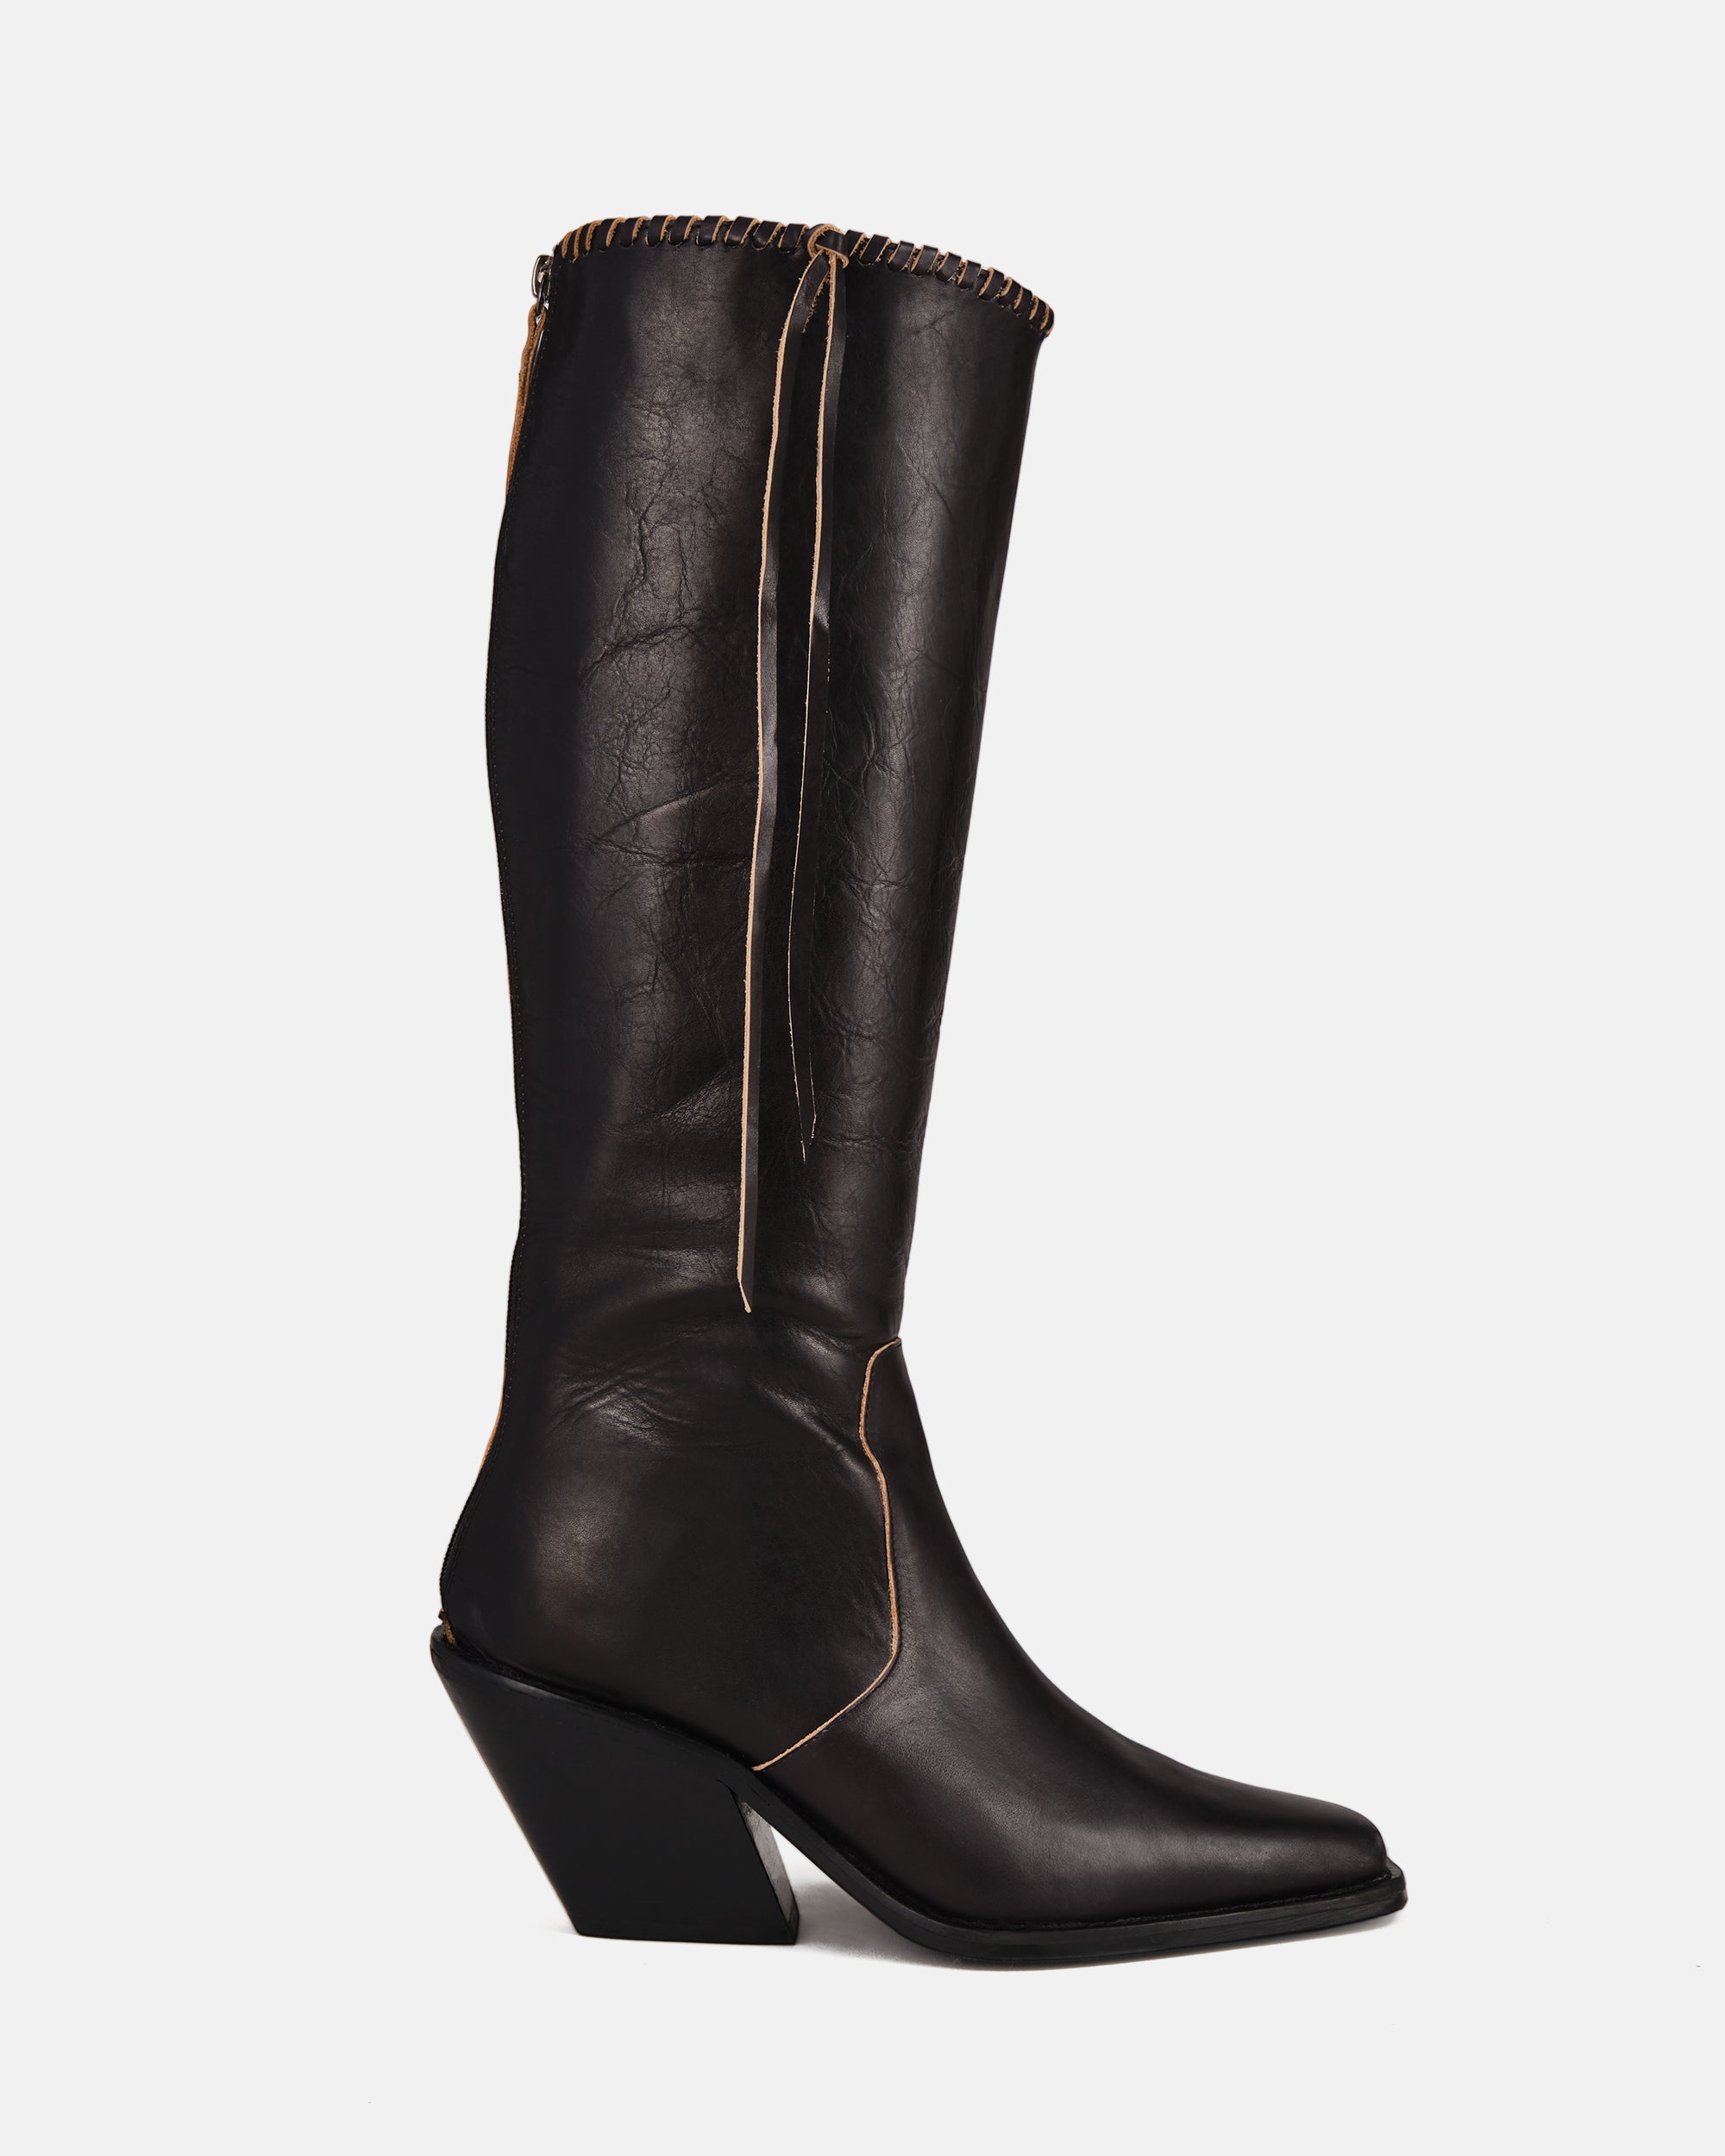 Duo Boots - Black